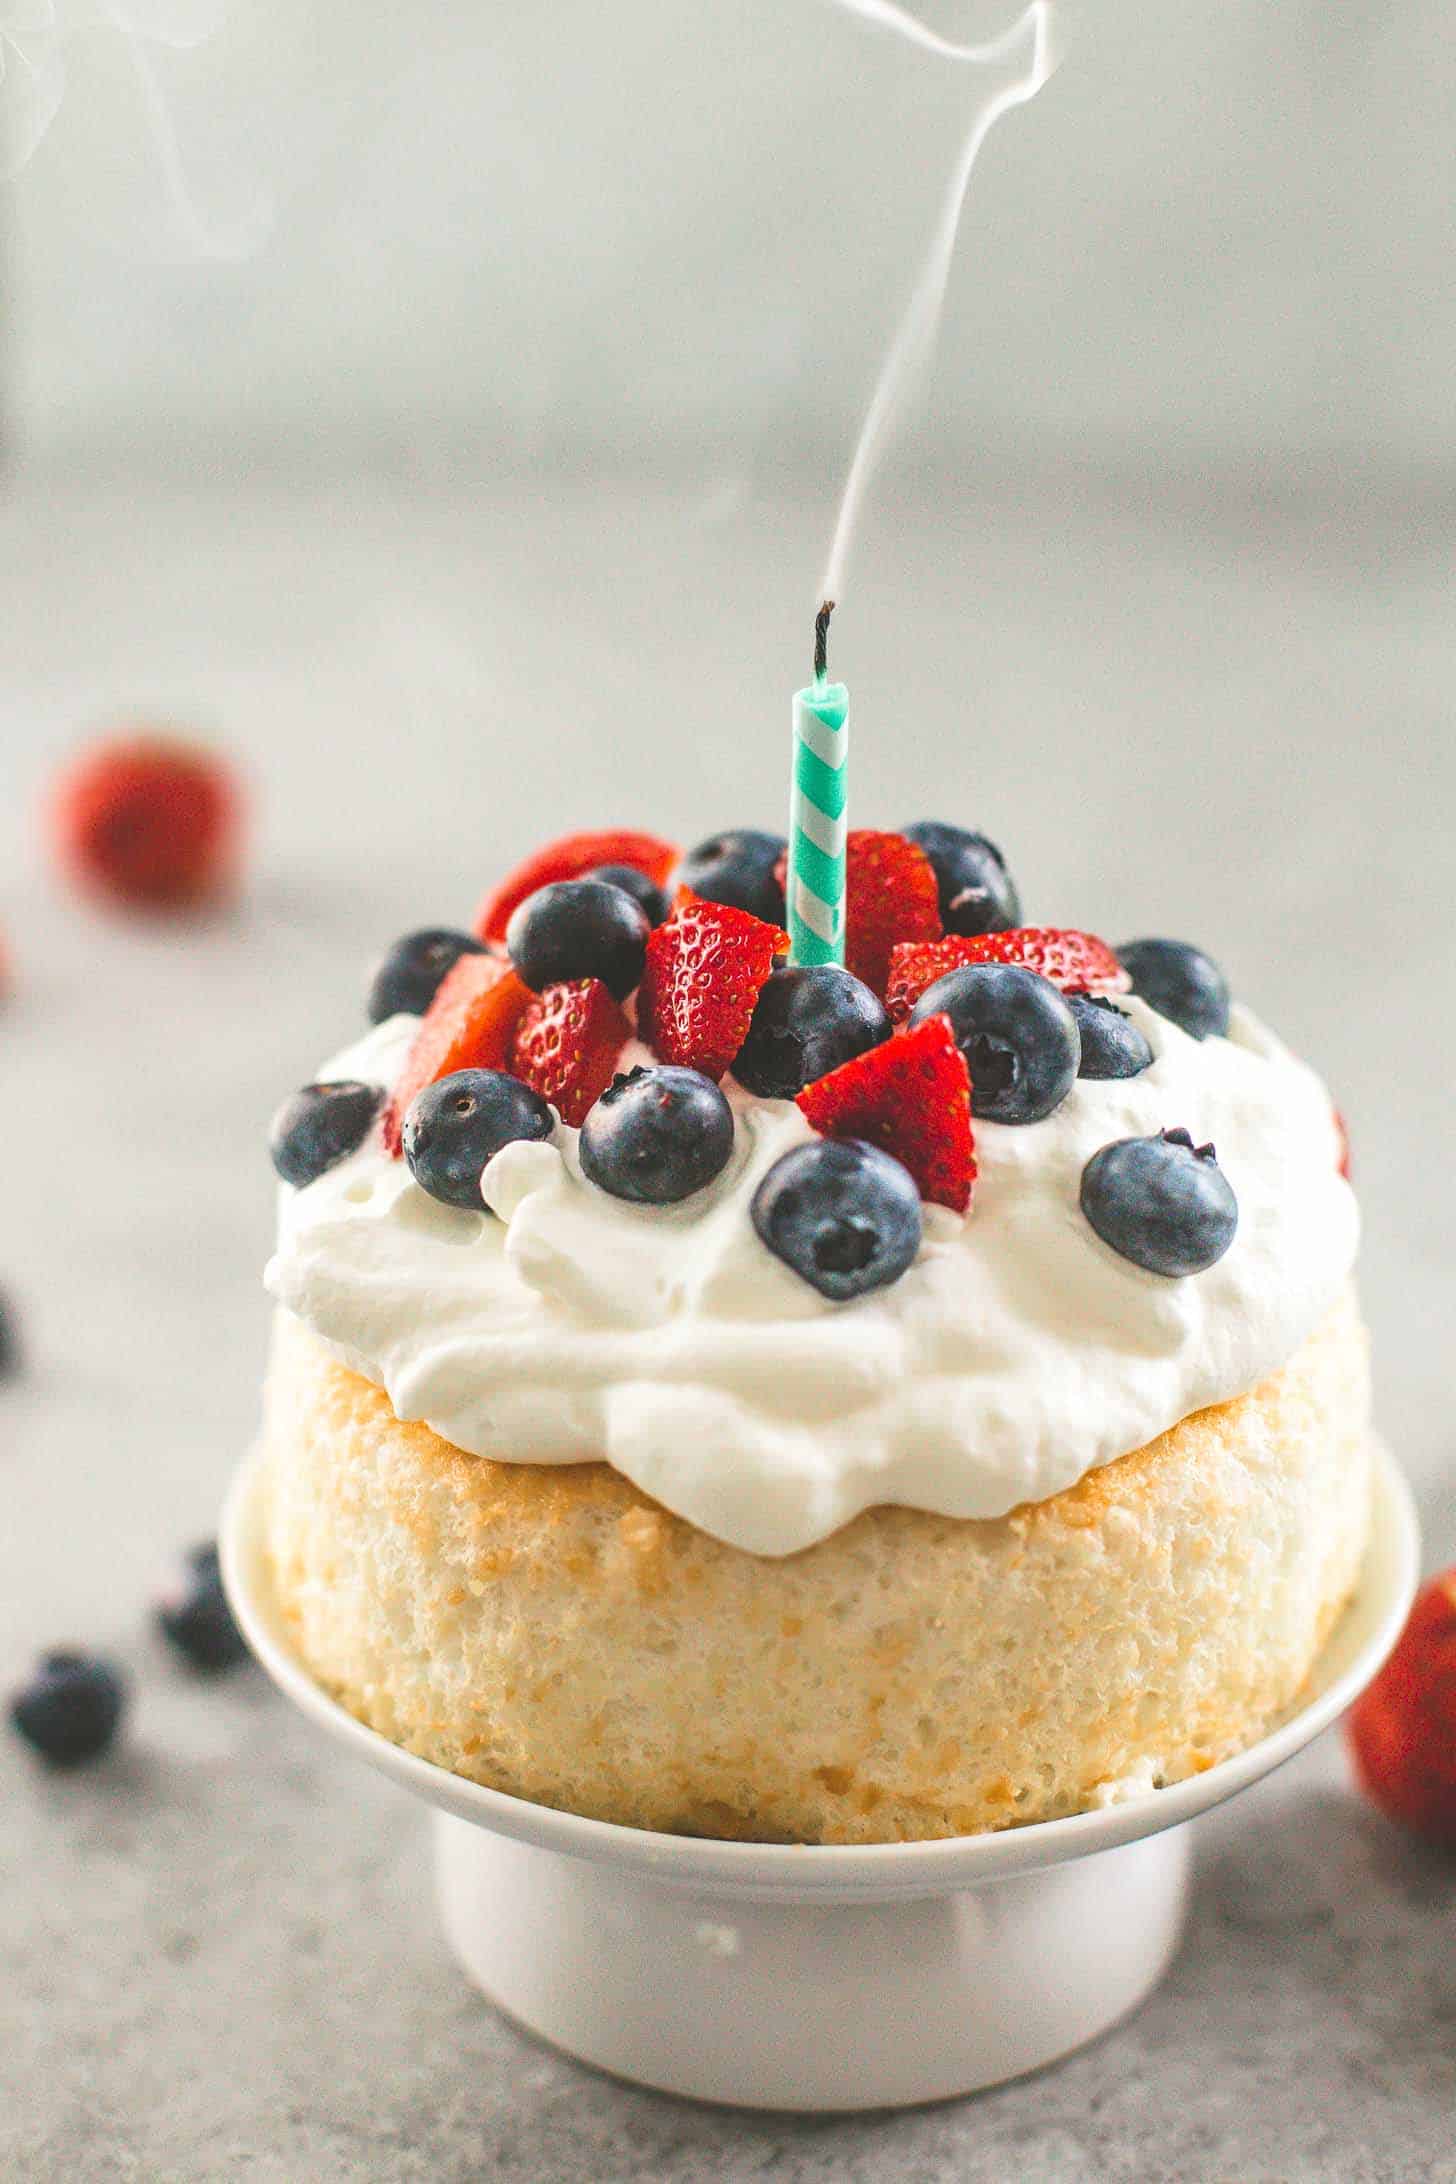 Smash Cake, topped with whipped cream and berries, with a candle